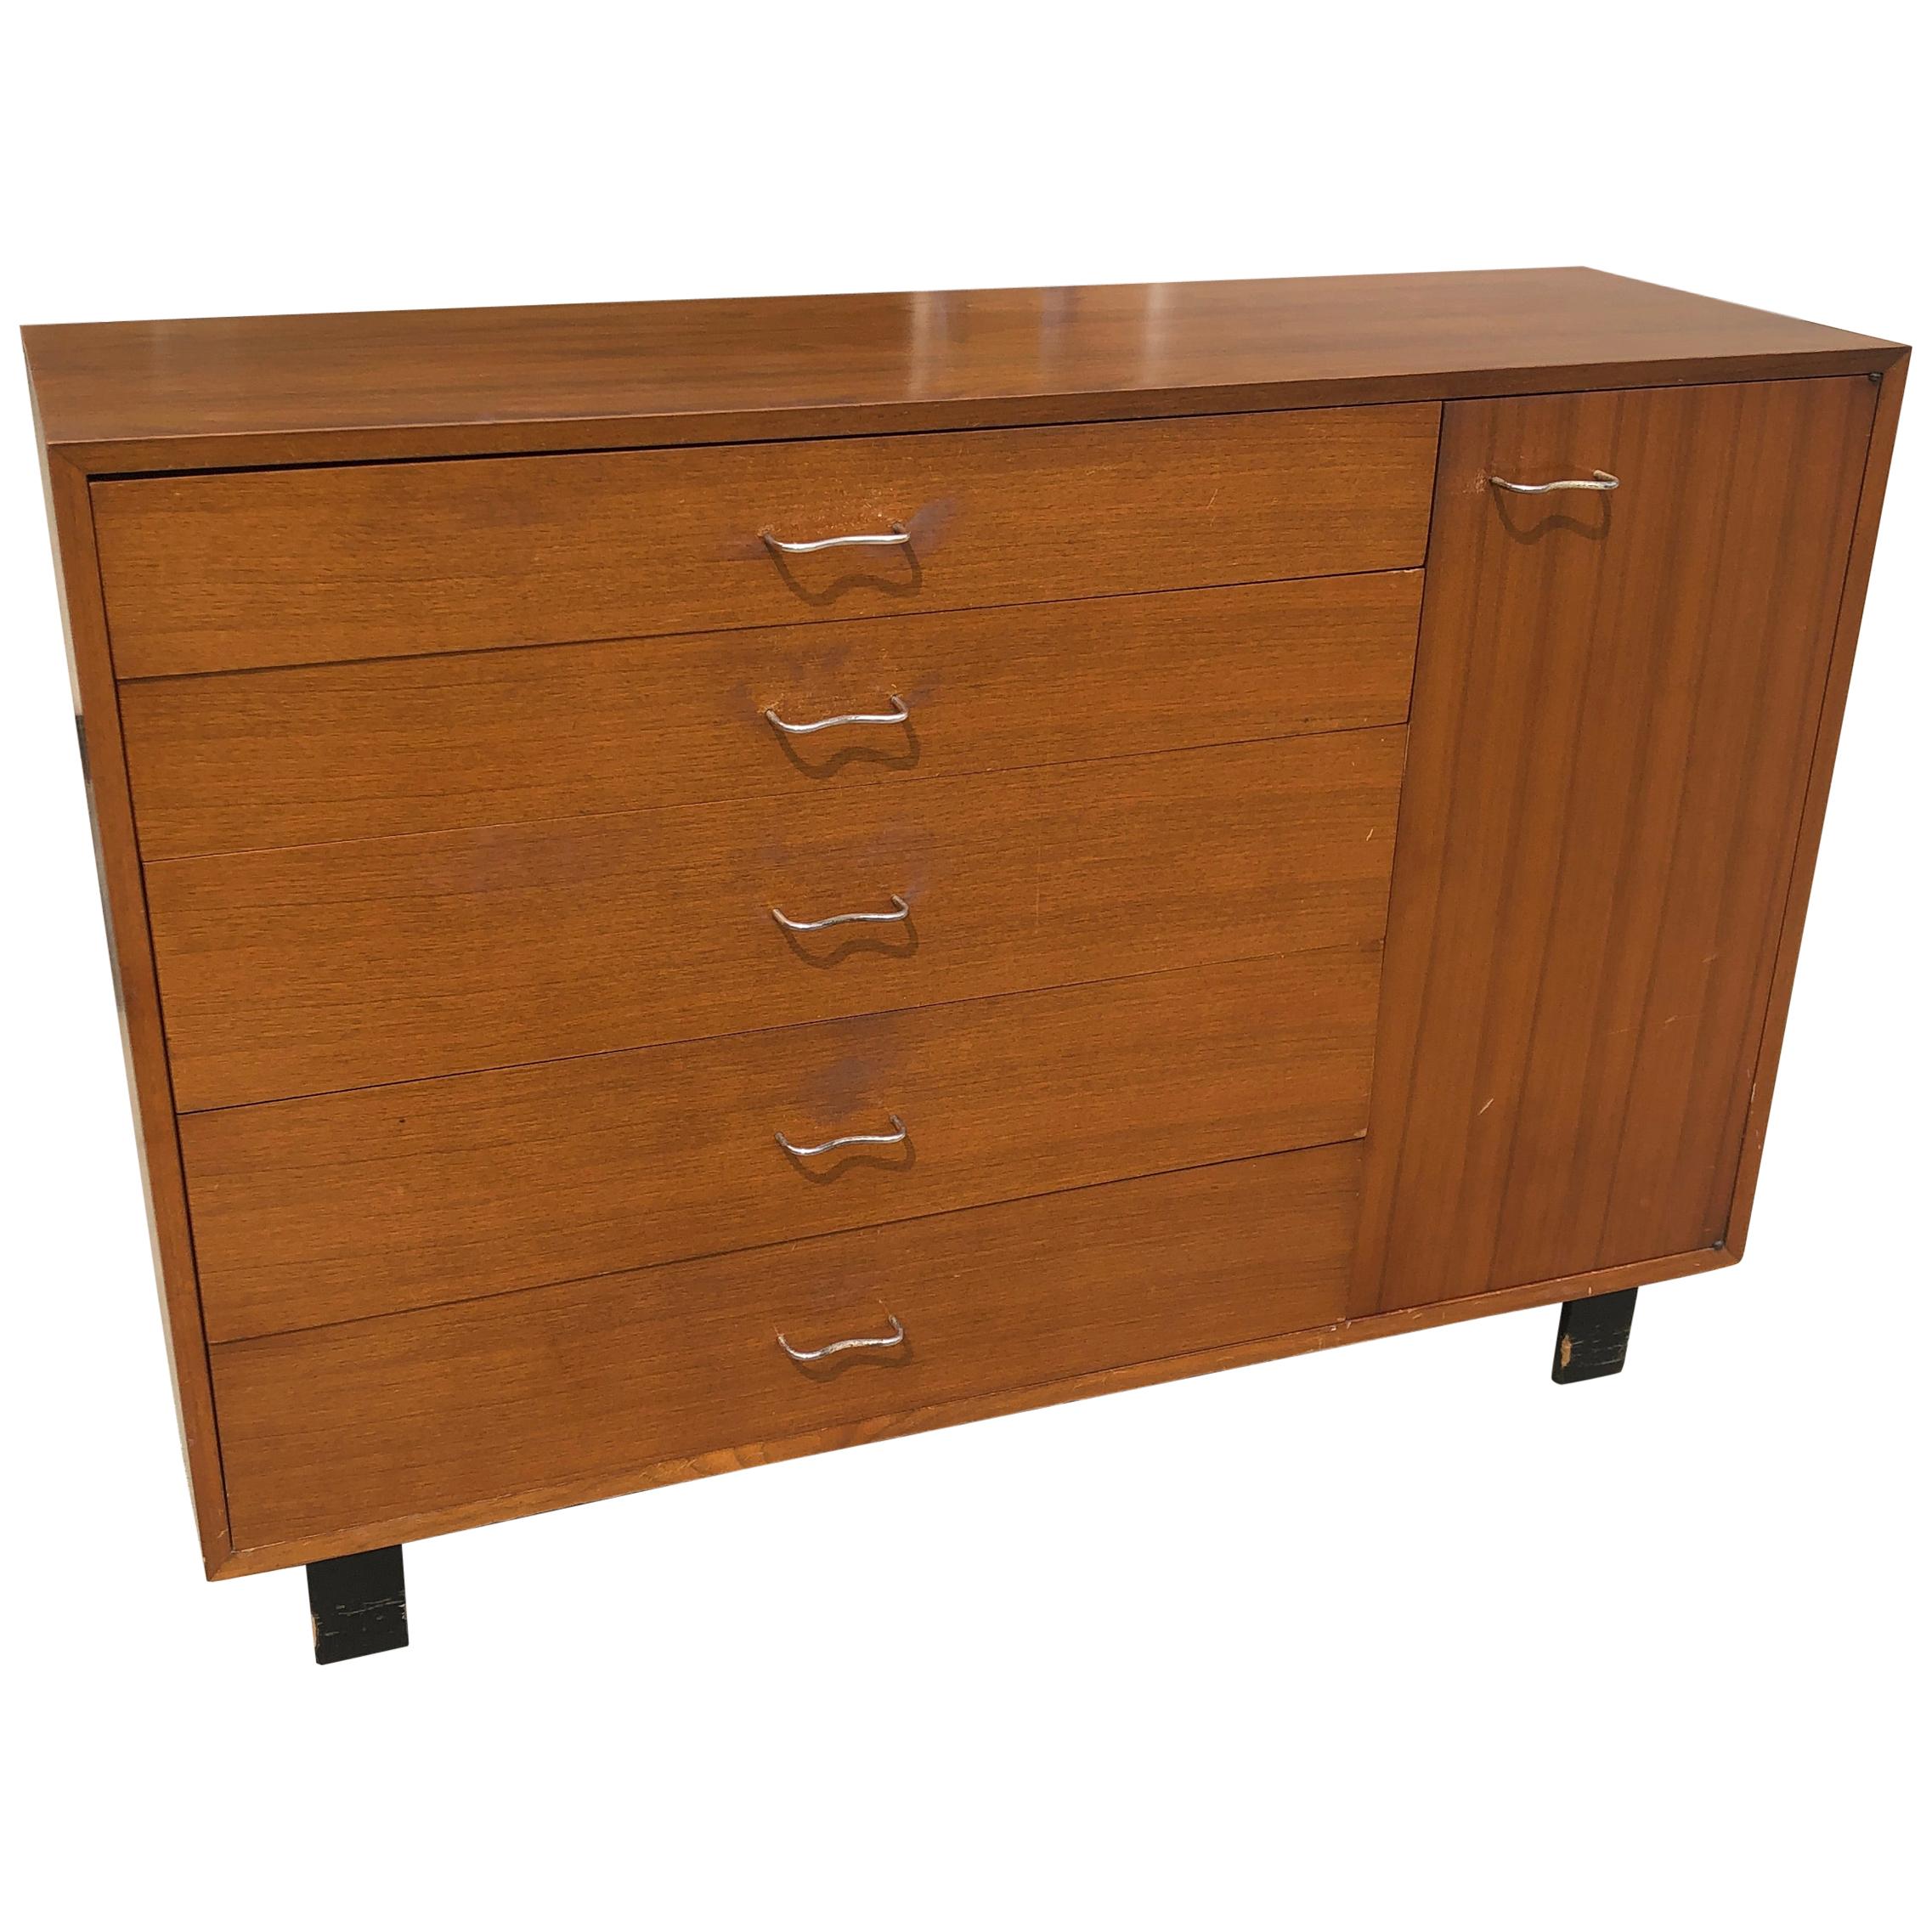 George Nelson for Herman Miller Cabinet Chest in Book Match Walnut Grain